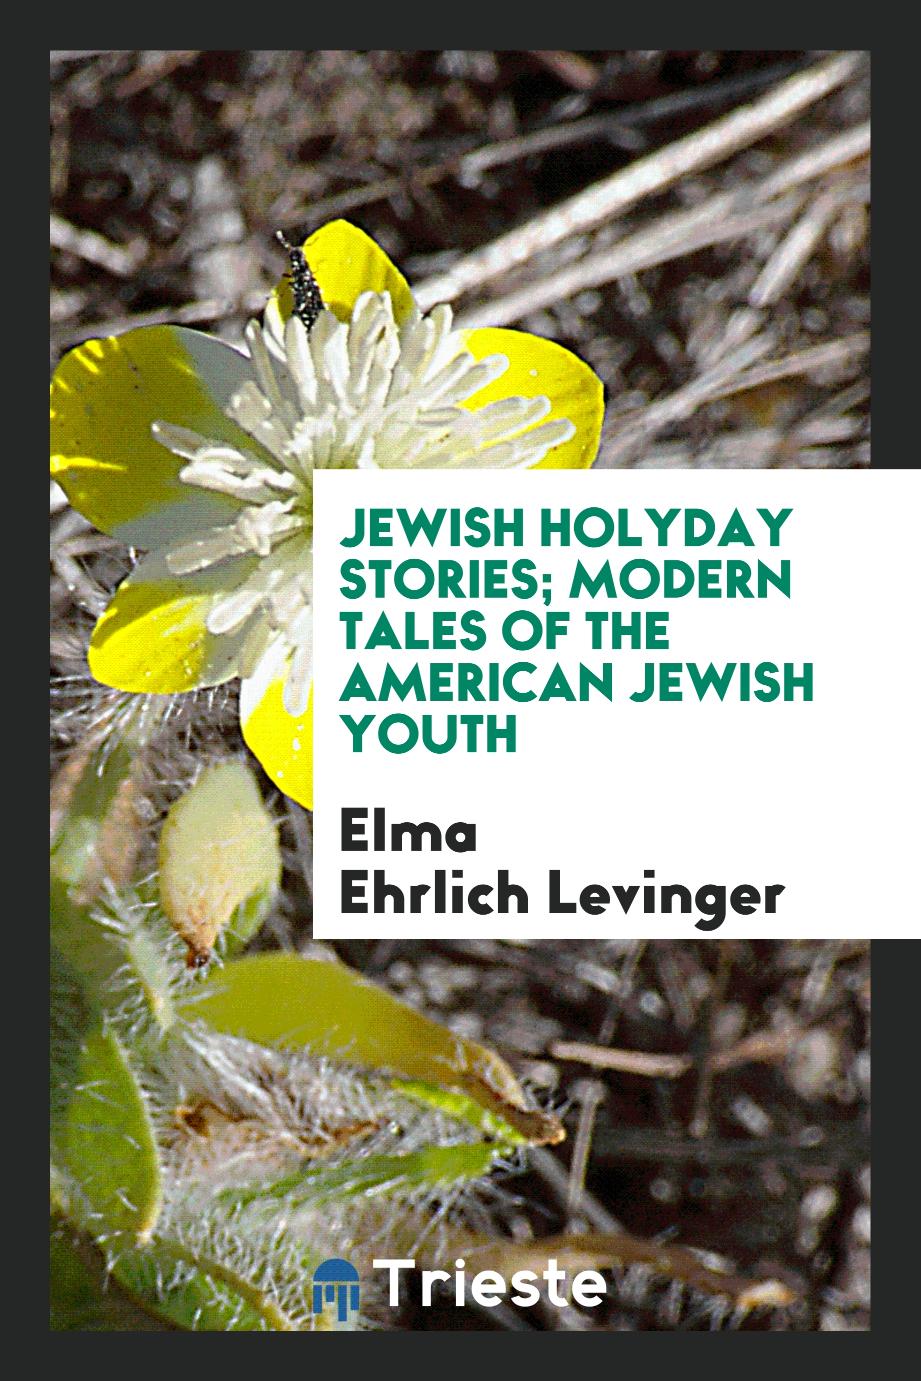 Jewish holyday stories; modern tales of the American Jewish youth